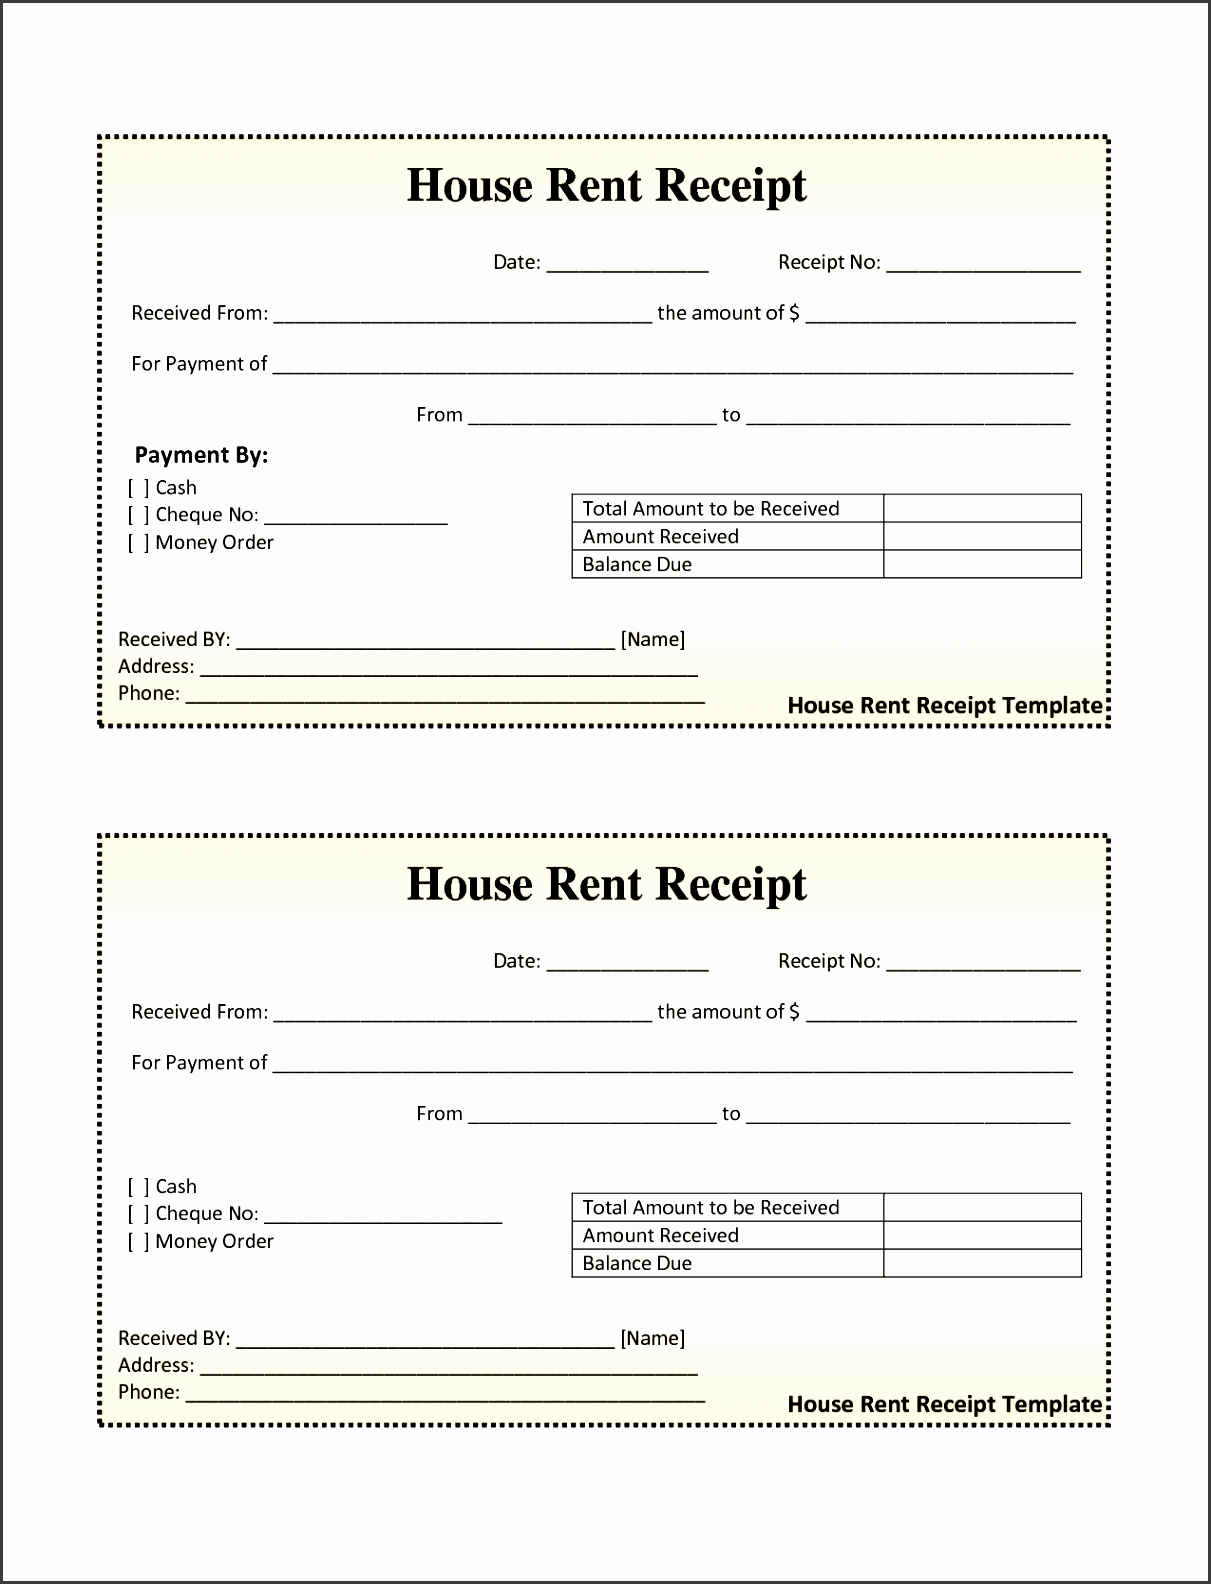 bill of quantities template and free house rental invoice house rent receipt template doc